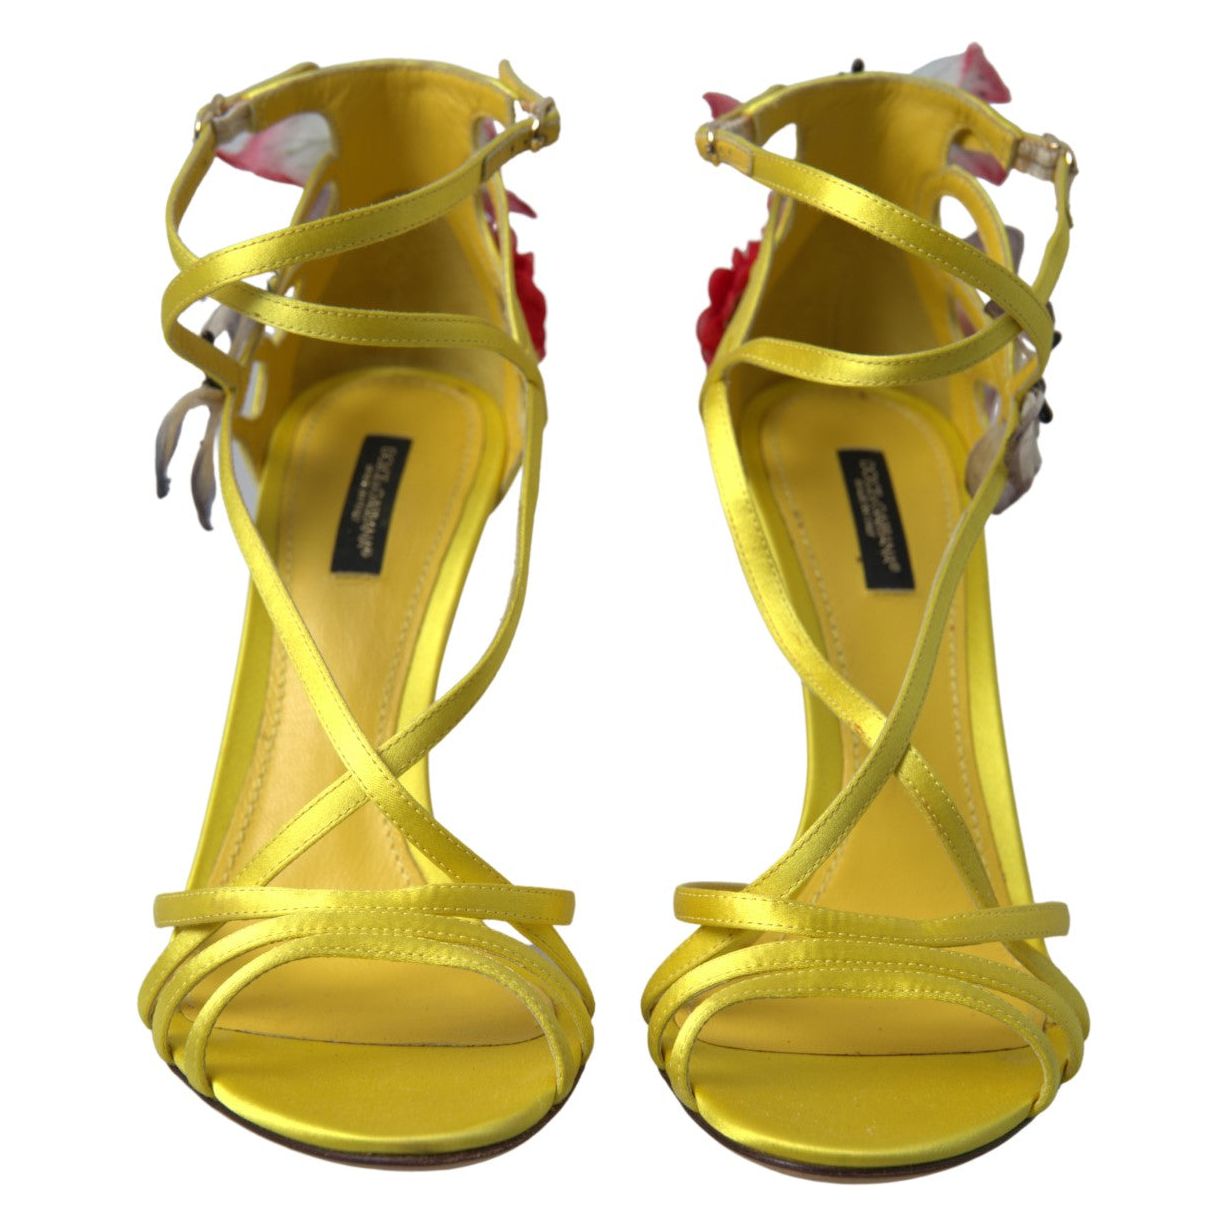 Dolce & Gabbana Enchanting Yellow Ankle Strap Sandals yellow-keira-butterfly-appliques-sandals